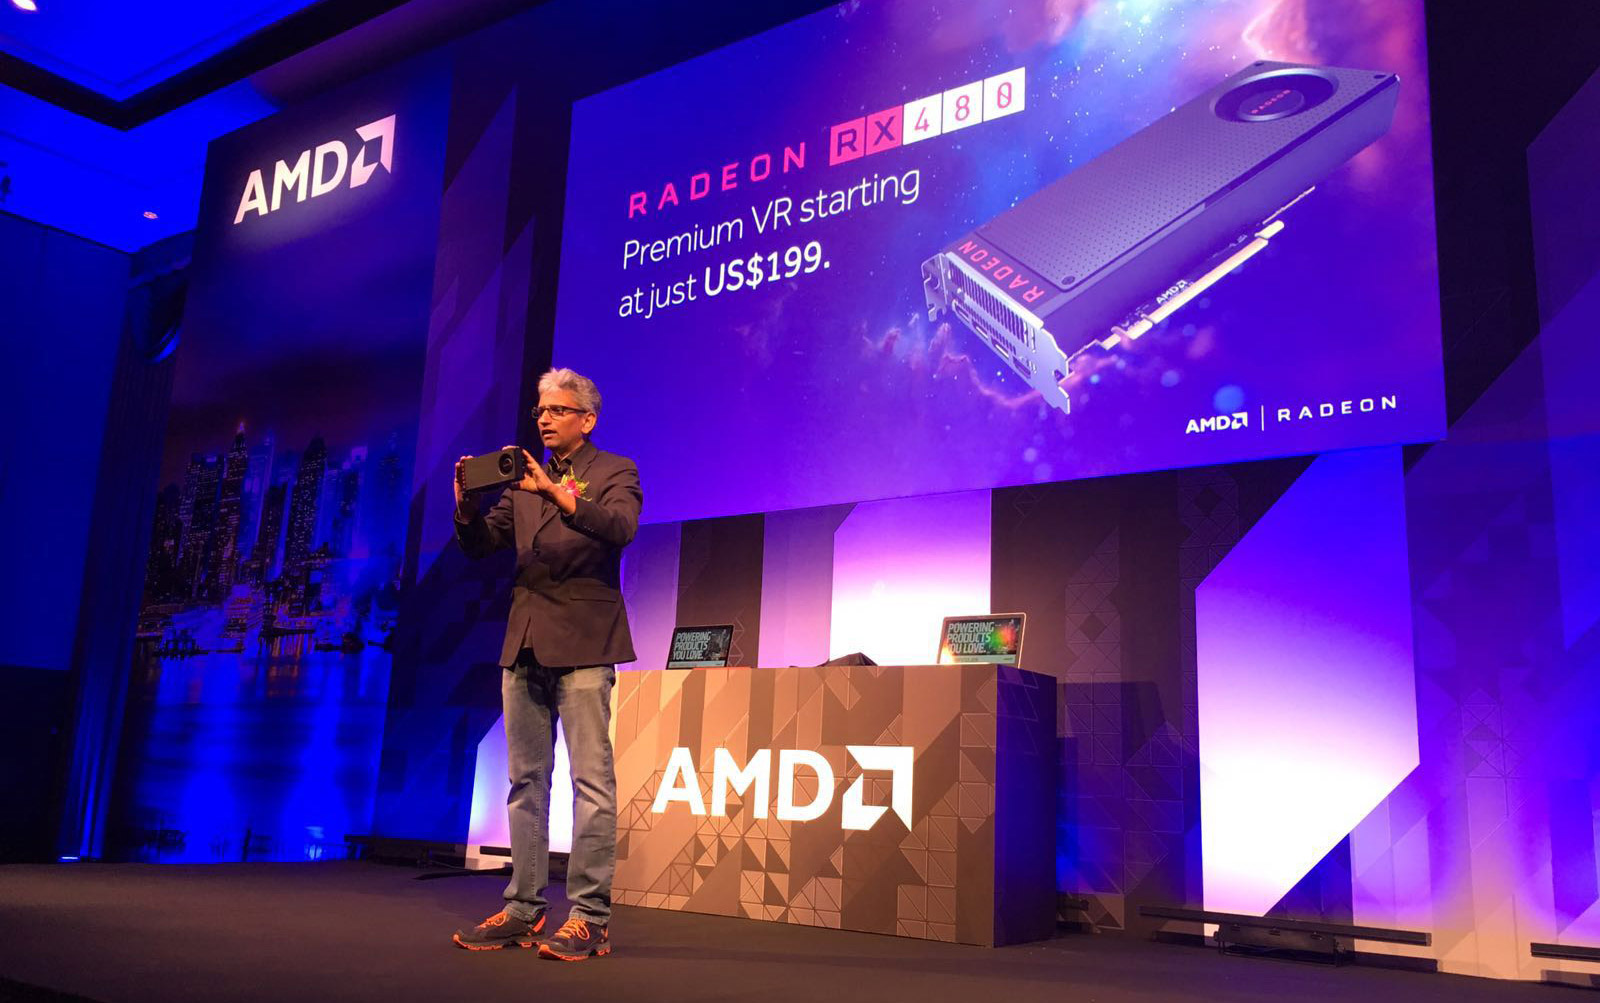 AMD's Raja Koduri announces that the company's newest Radeon RX 480 graphics cards will be available for as little as $199.